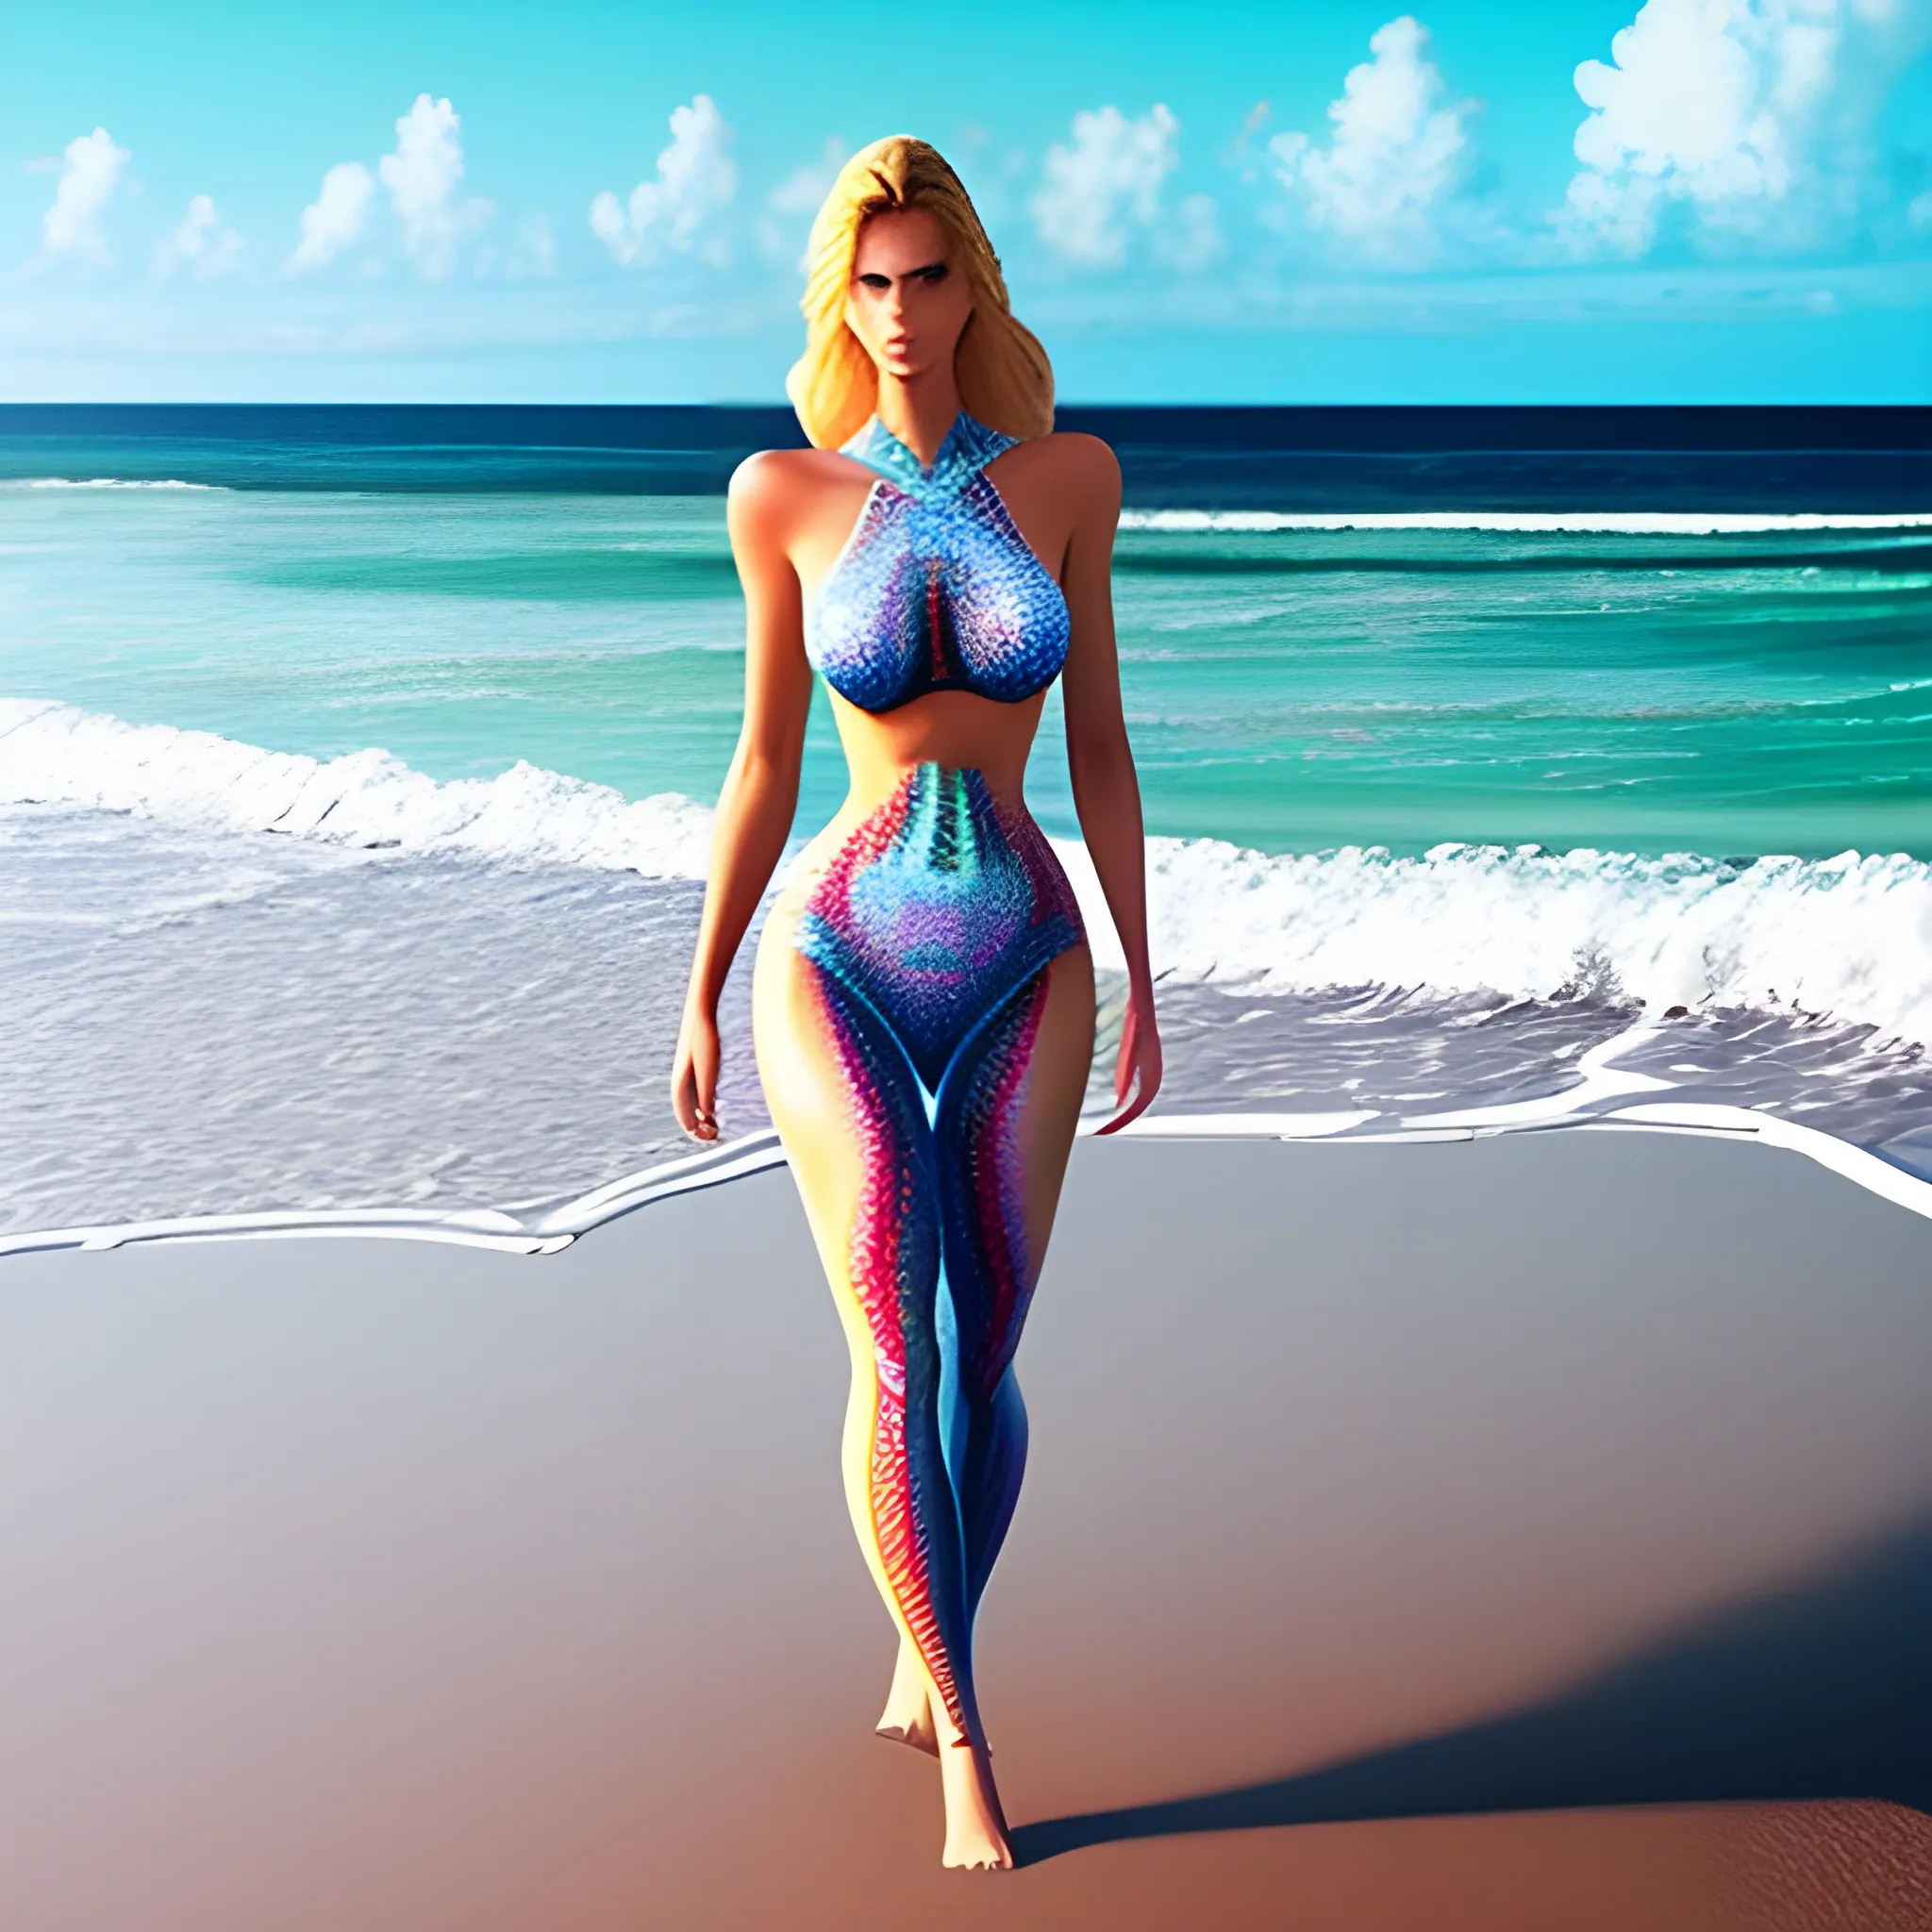 A beautiful girl walking on the beach, with intrinsic realistic details, Trippy